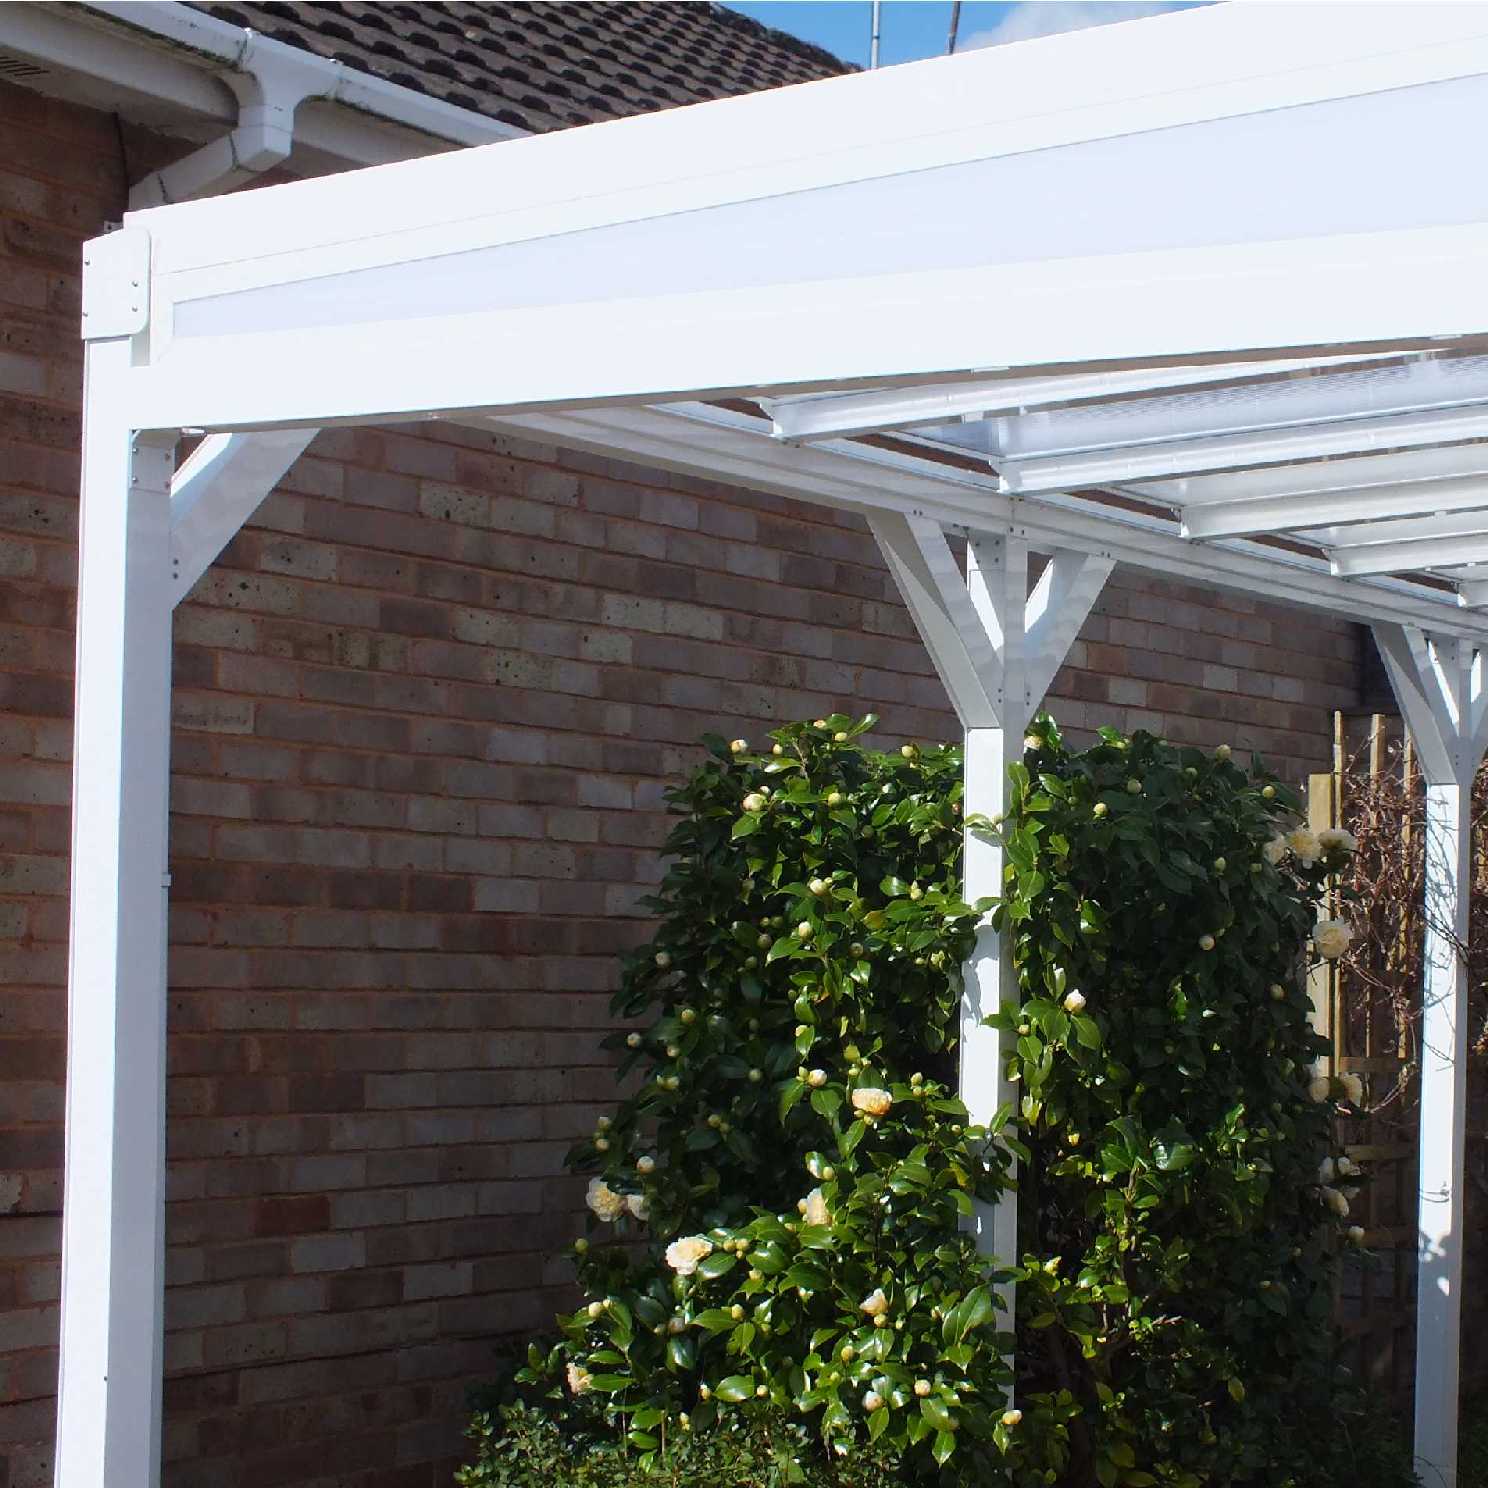 Omega Smart Lean-To Canopy, White with 16mm Polycarbonate Glazing - 7.4m (W) x 2.0m (P), (4) Supporting Posts from Omega Build